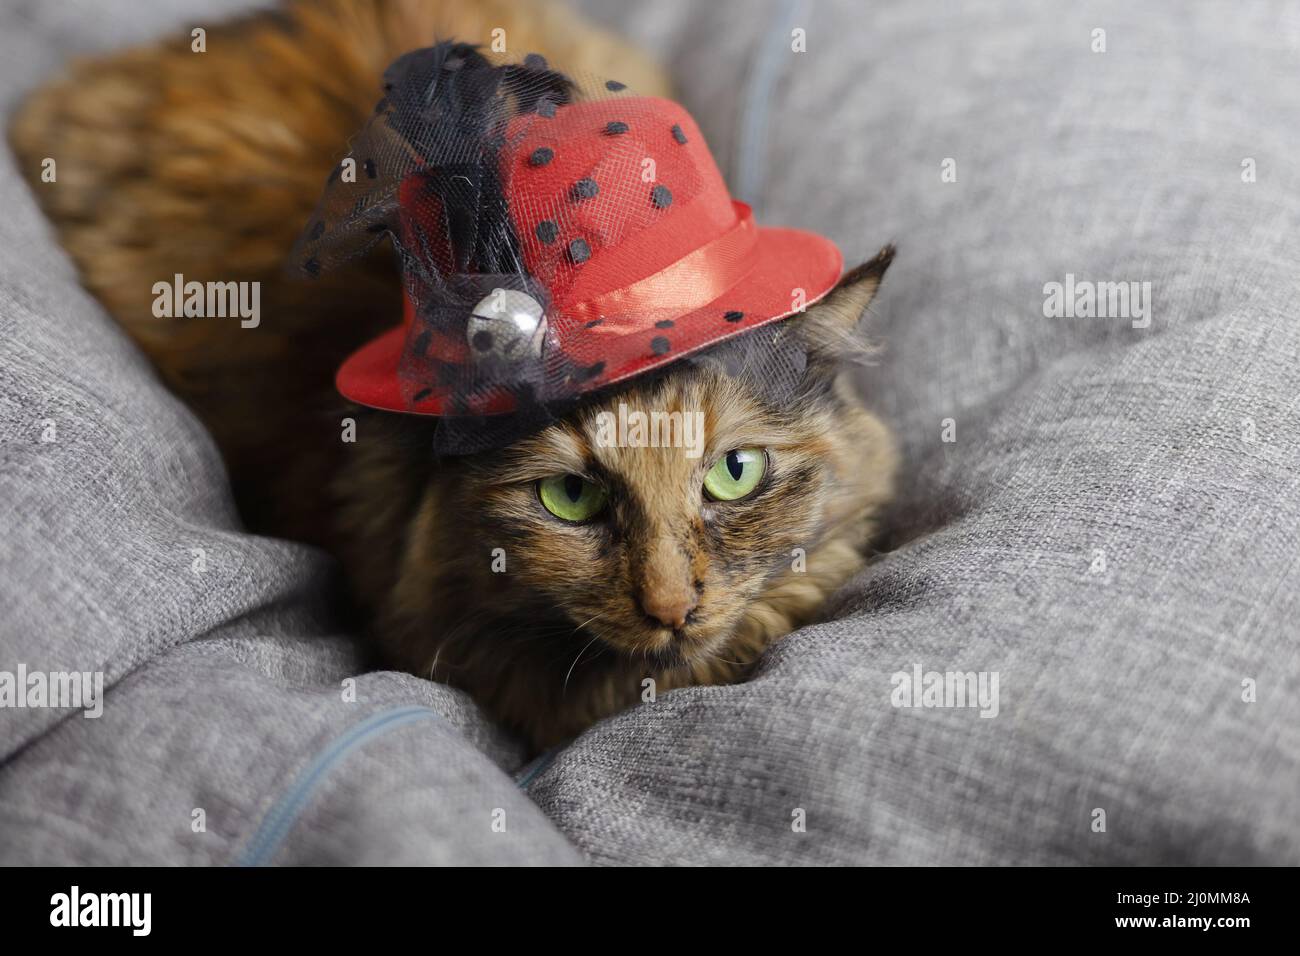 A beautiful lady cat in a red retro hat lies on a gray soft armchair. Focus on the cat's face and eyes Stock Photo